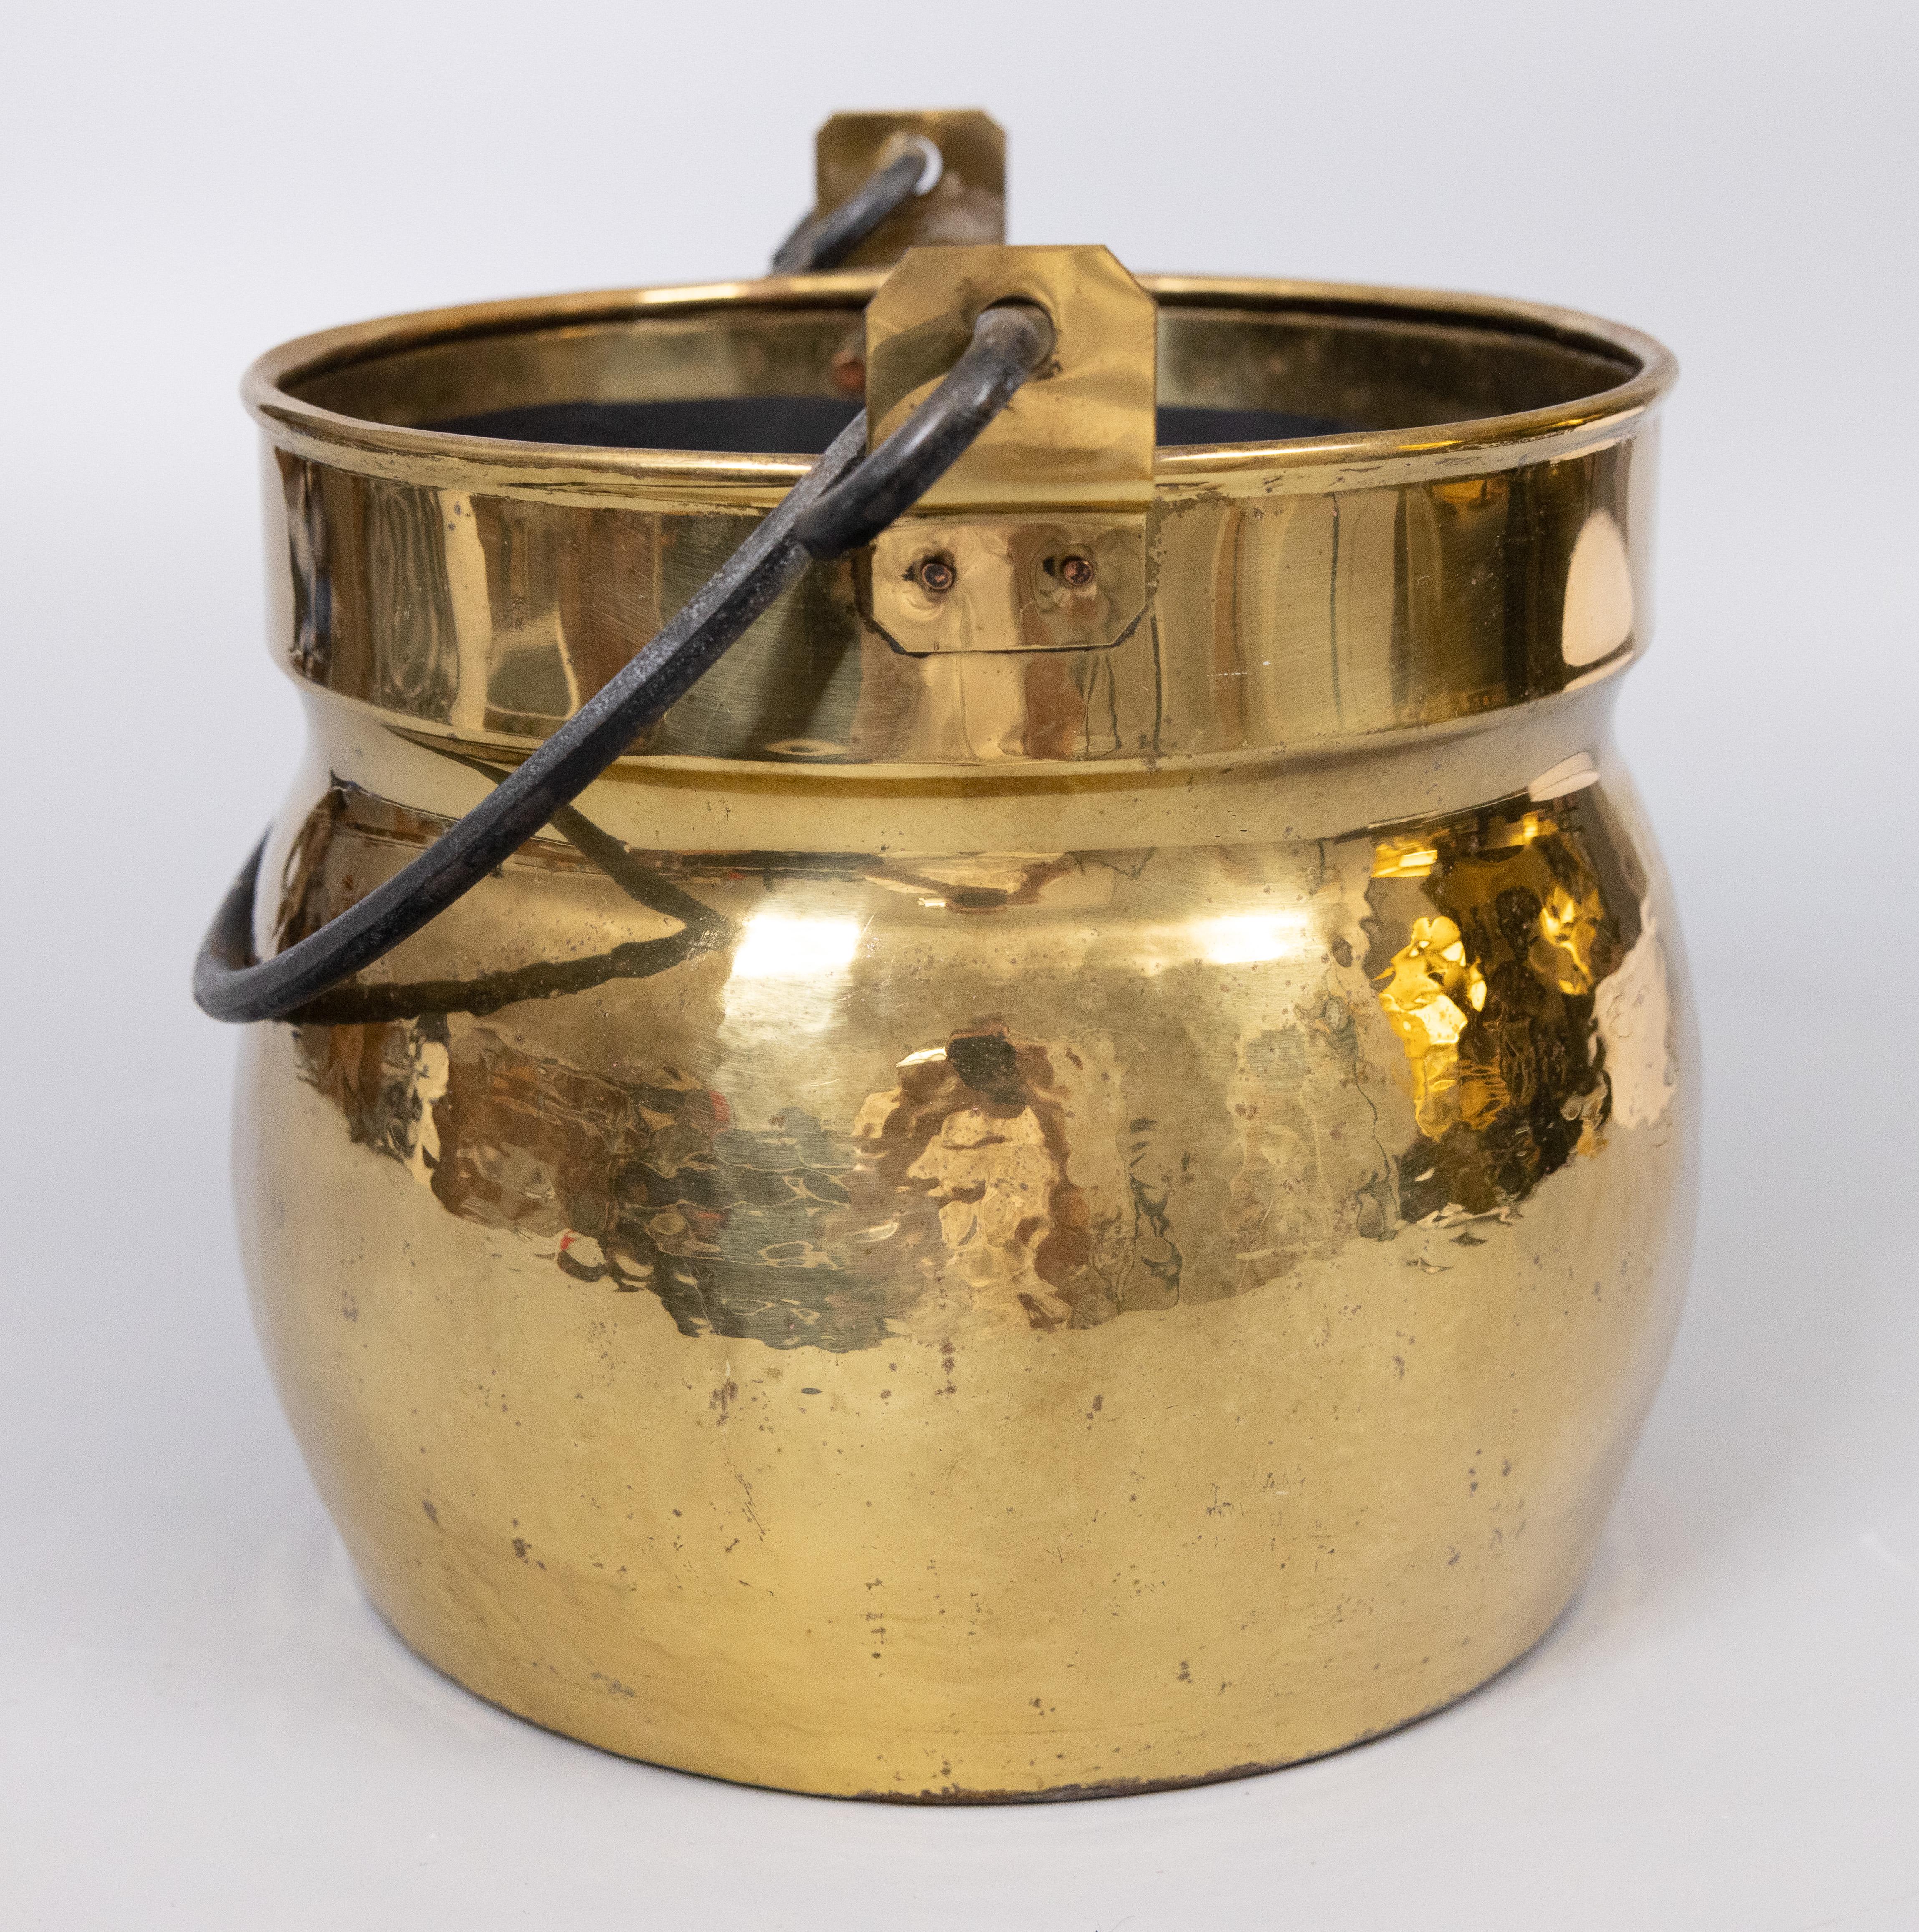 vintage brass pot with handle